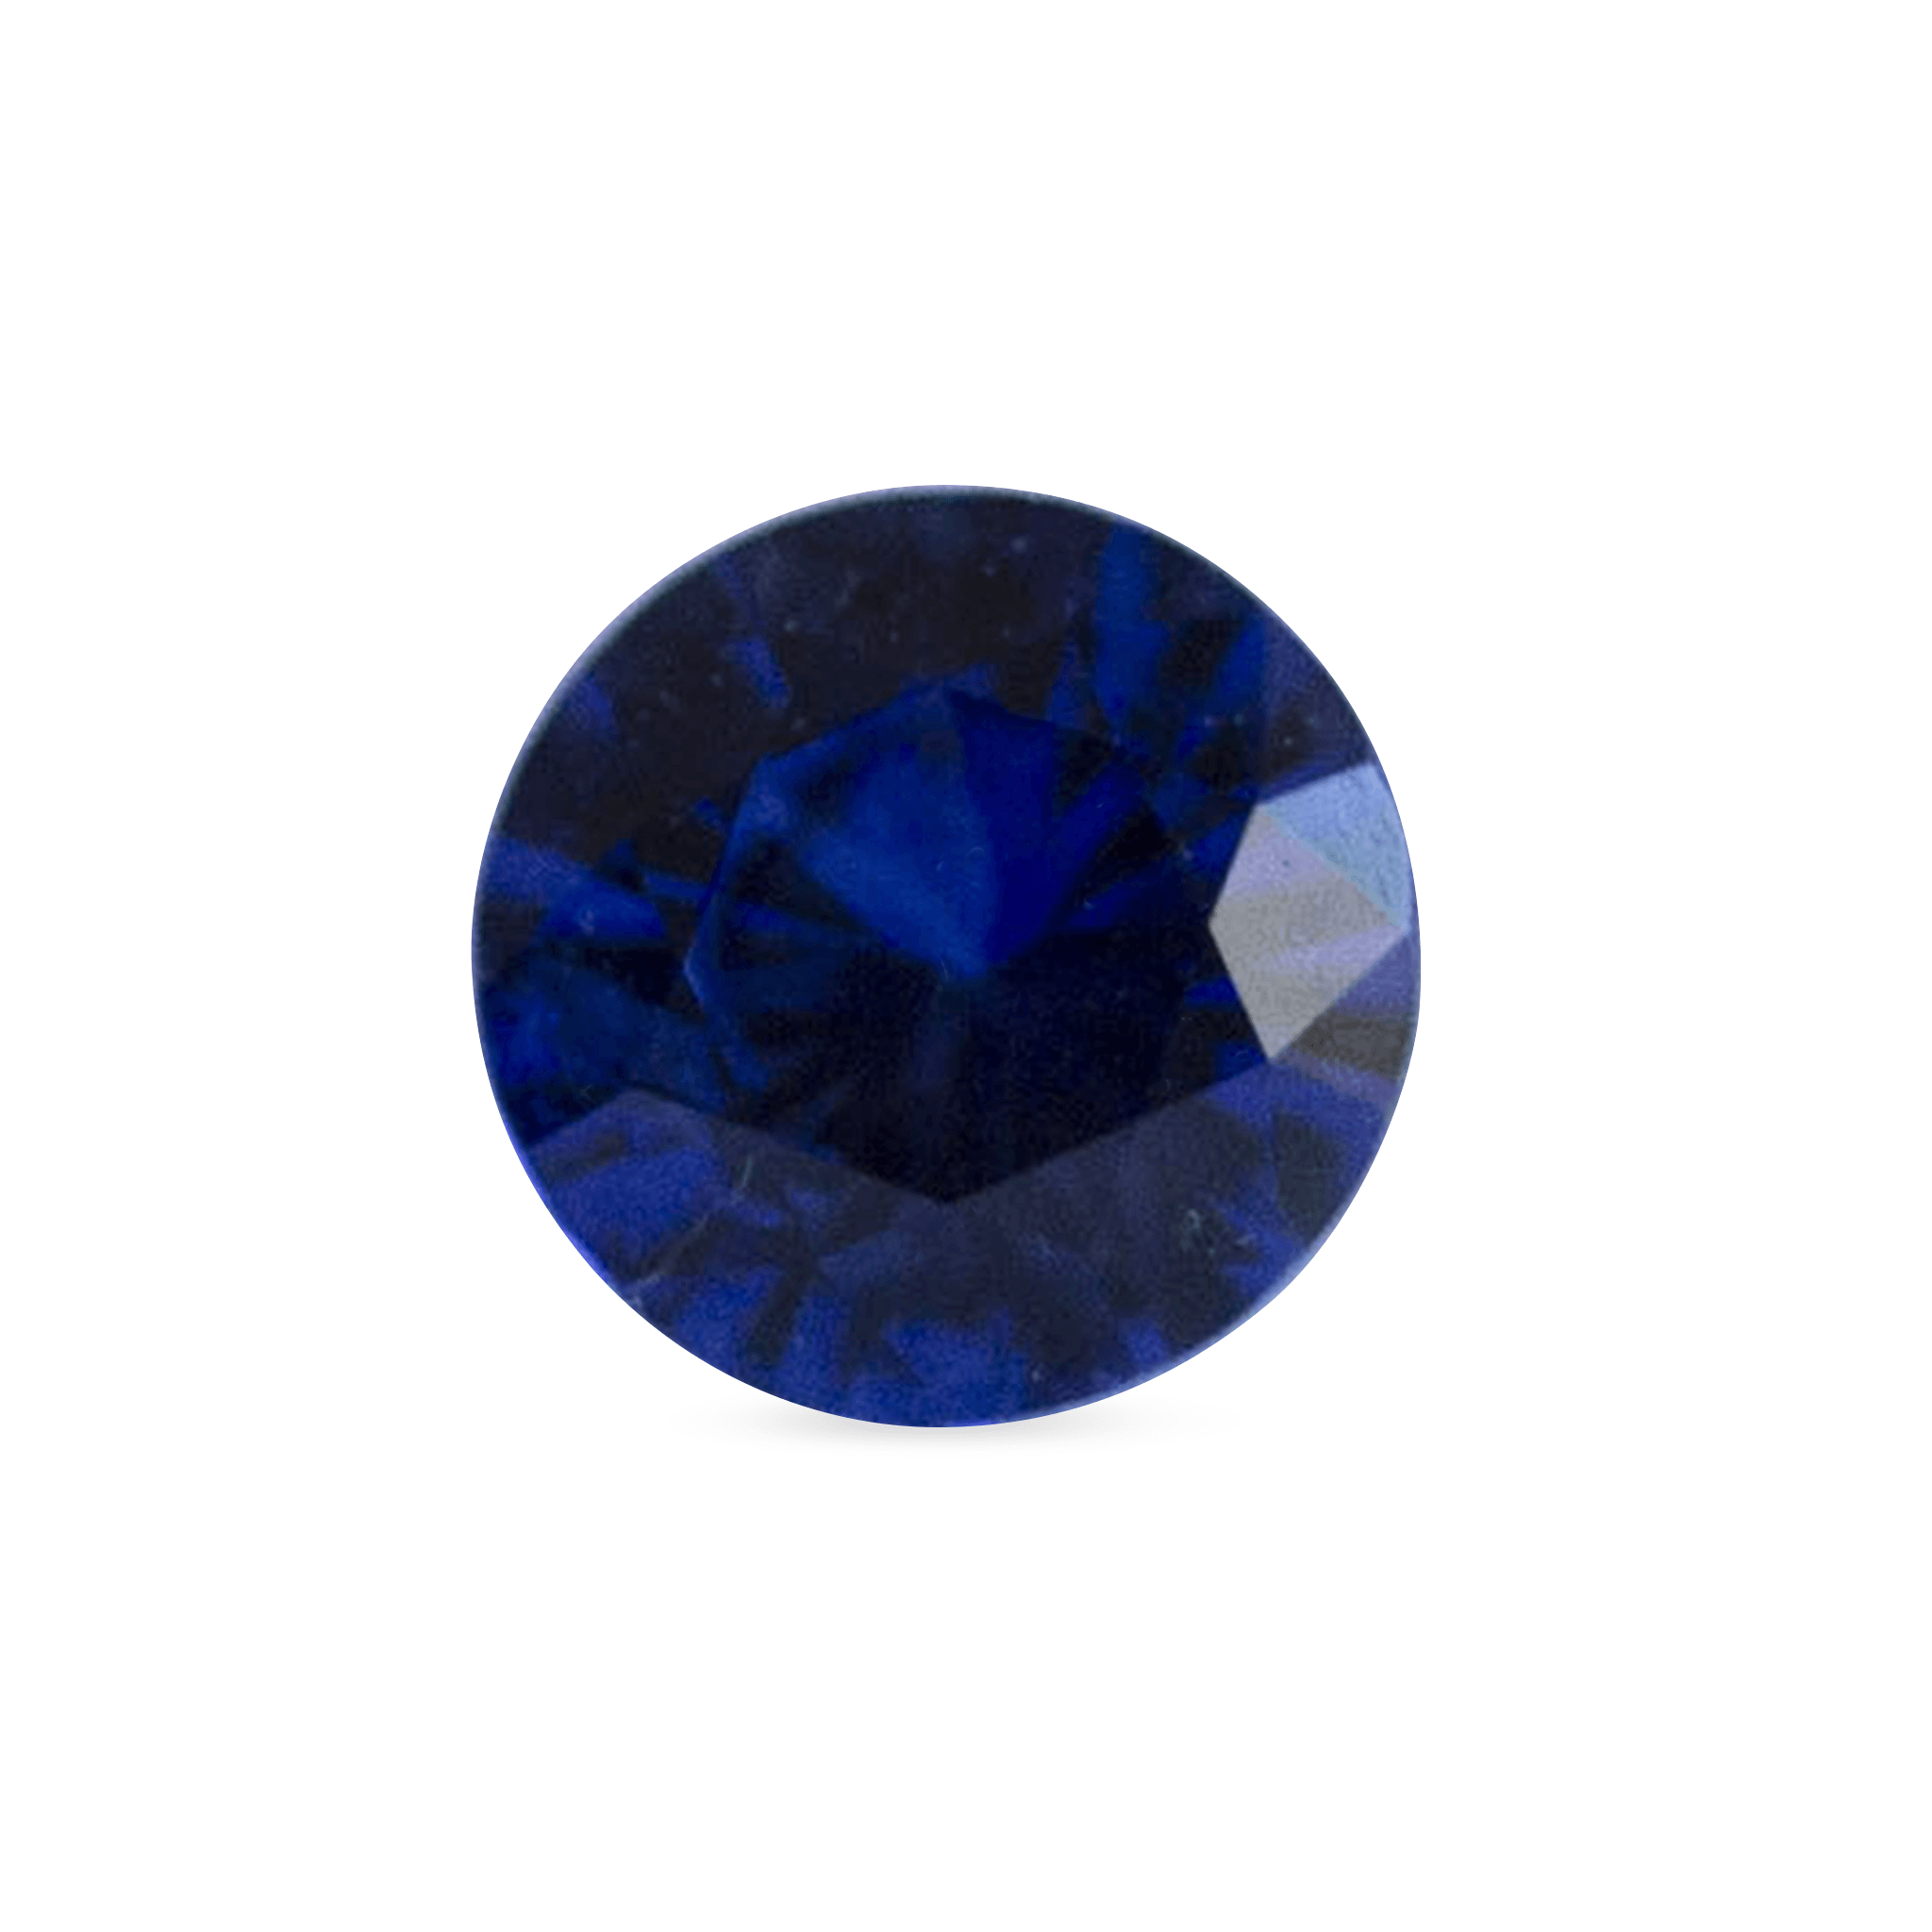 Ethical, Custom Ring-0.52 ct Deep Water Blue Round Brilliant